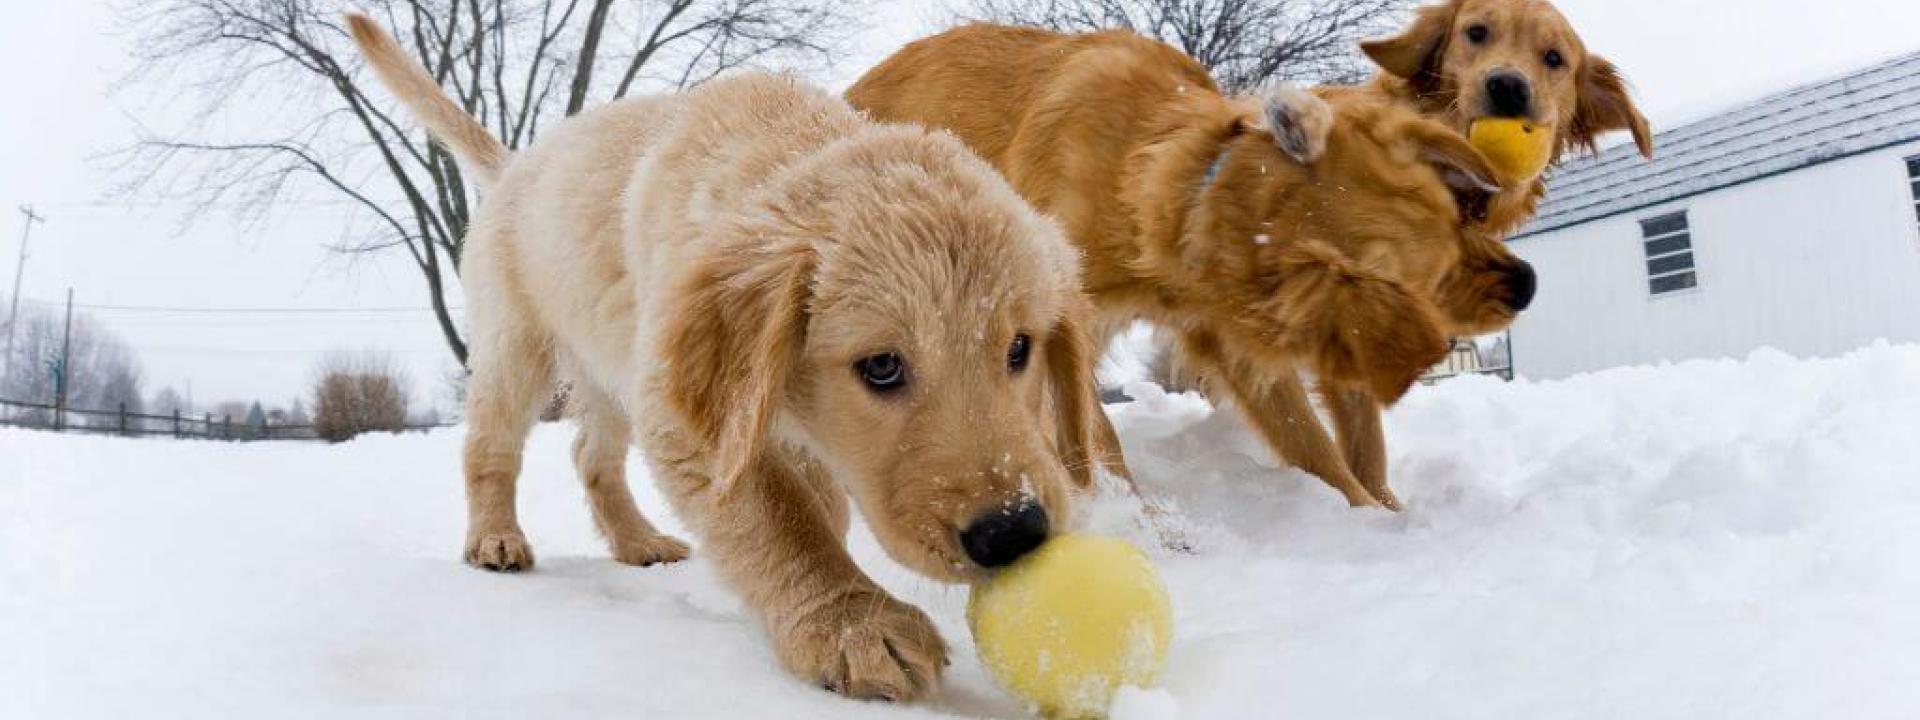 3 golden retrievers playing in the snow